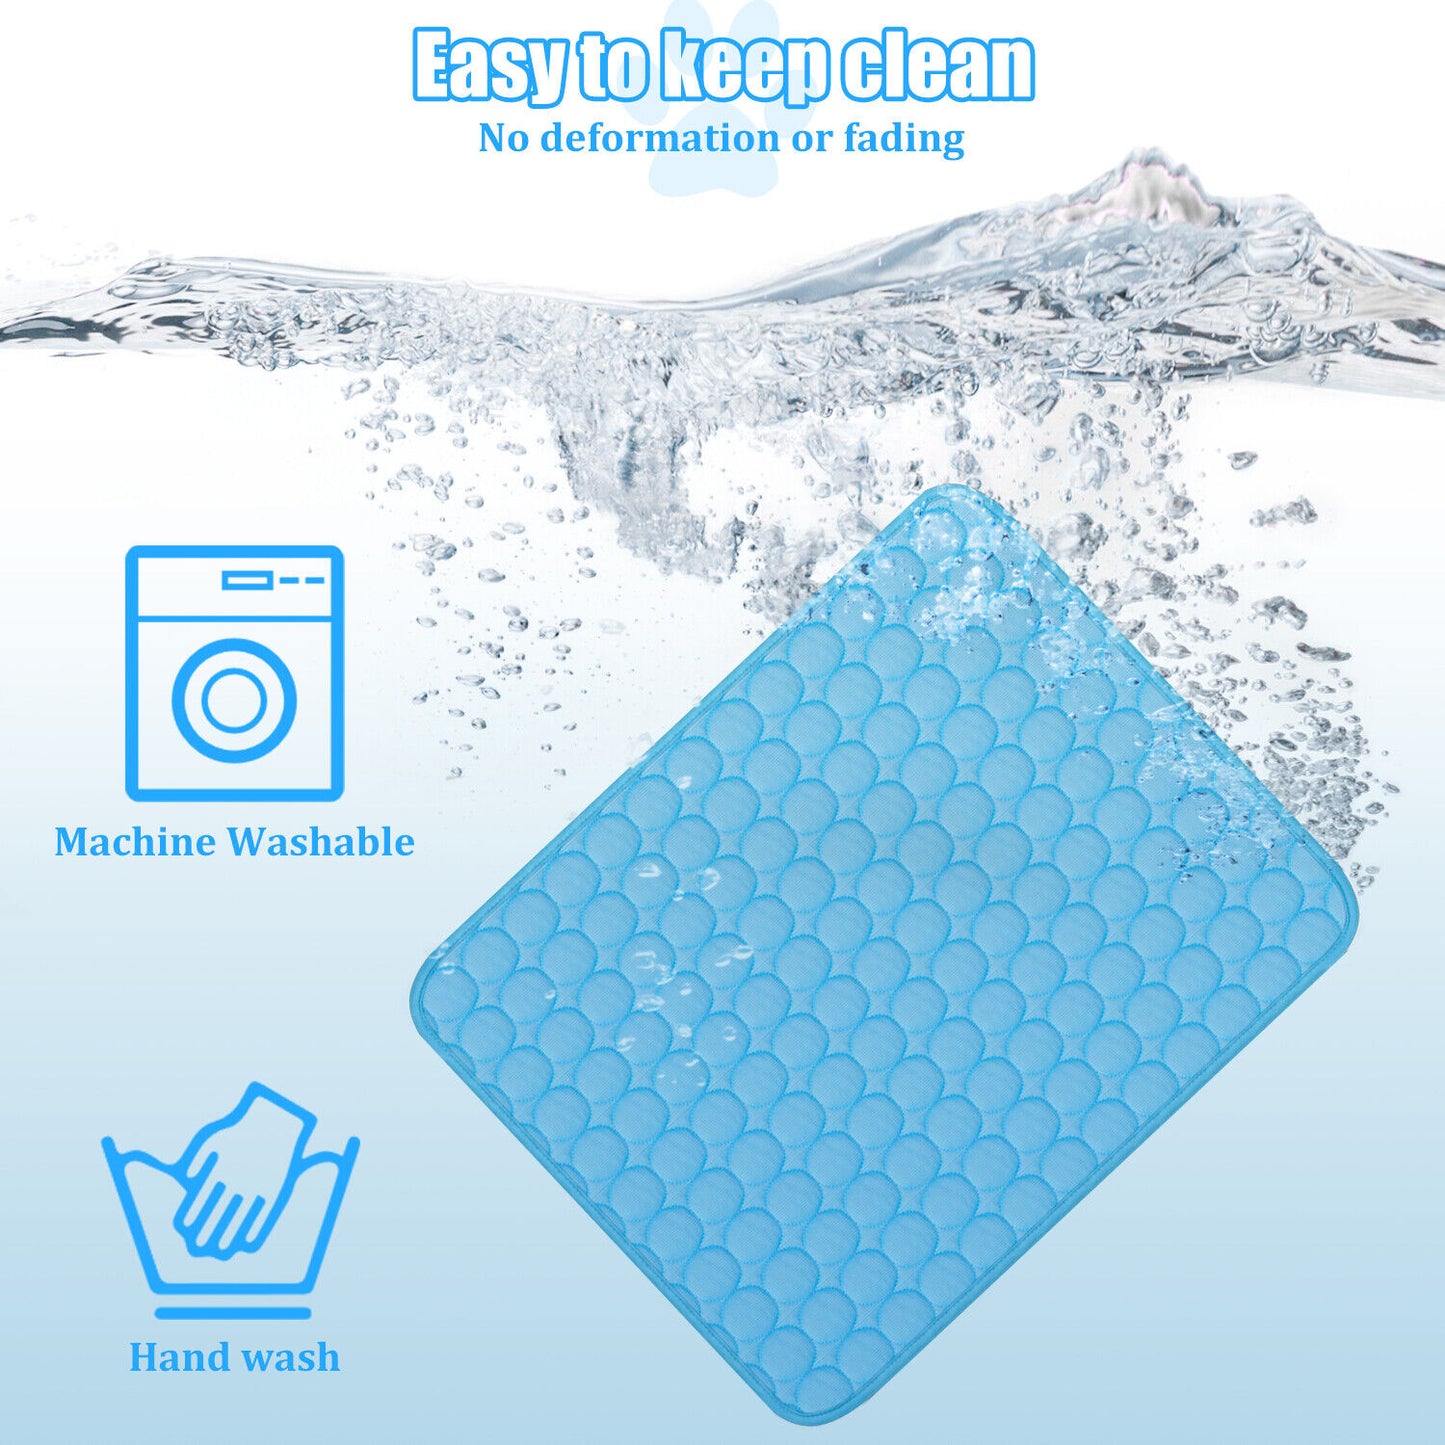 Pet Cooling Mat Cool Pad Cushion Dog Cat Puppy Blanket For Summer Sleeping Bed Dog Cooling Bed Pet Cooling Mat - shoptrendbeast.com